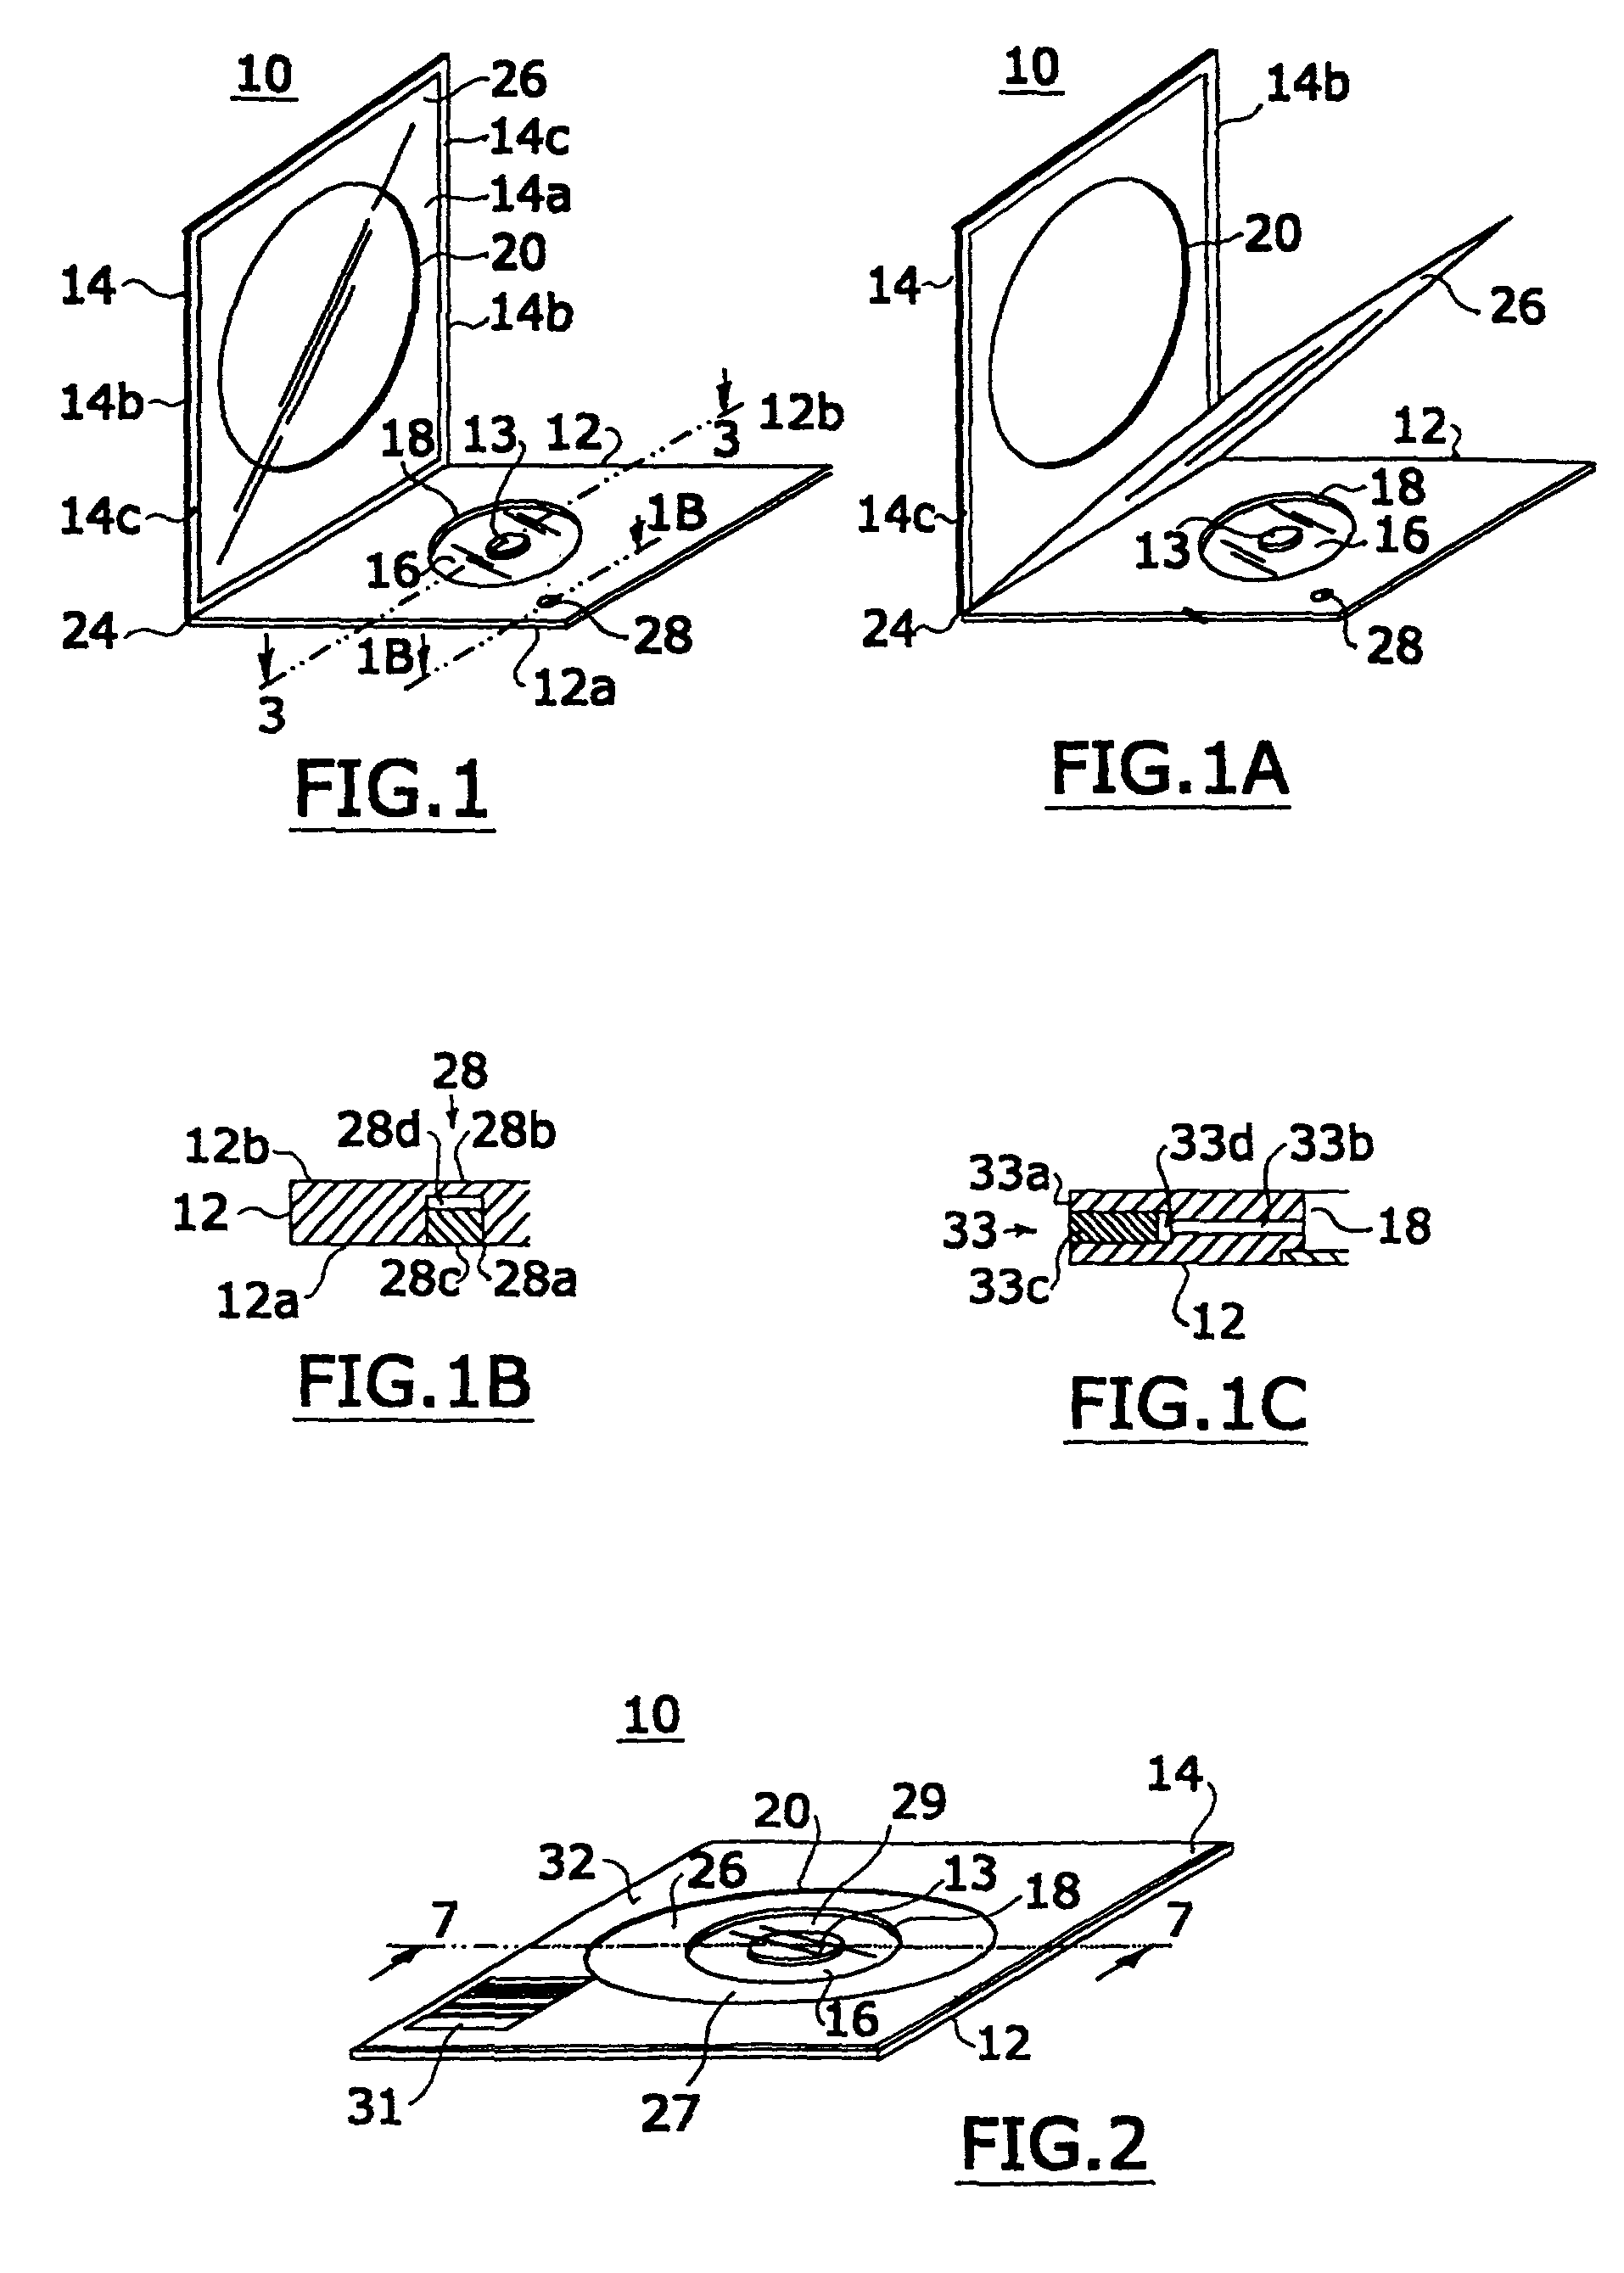 Cassette for facilitating optical sectioning of a retained tissue specimen